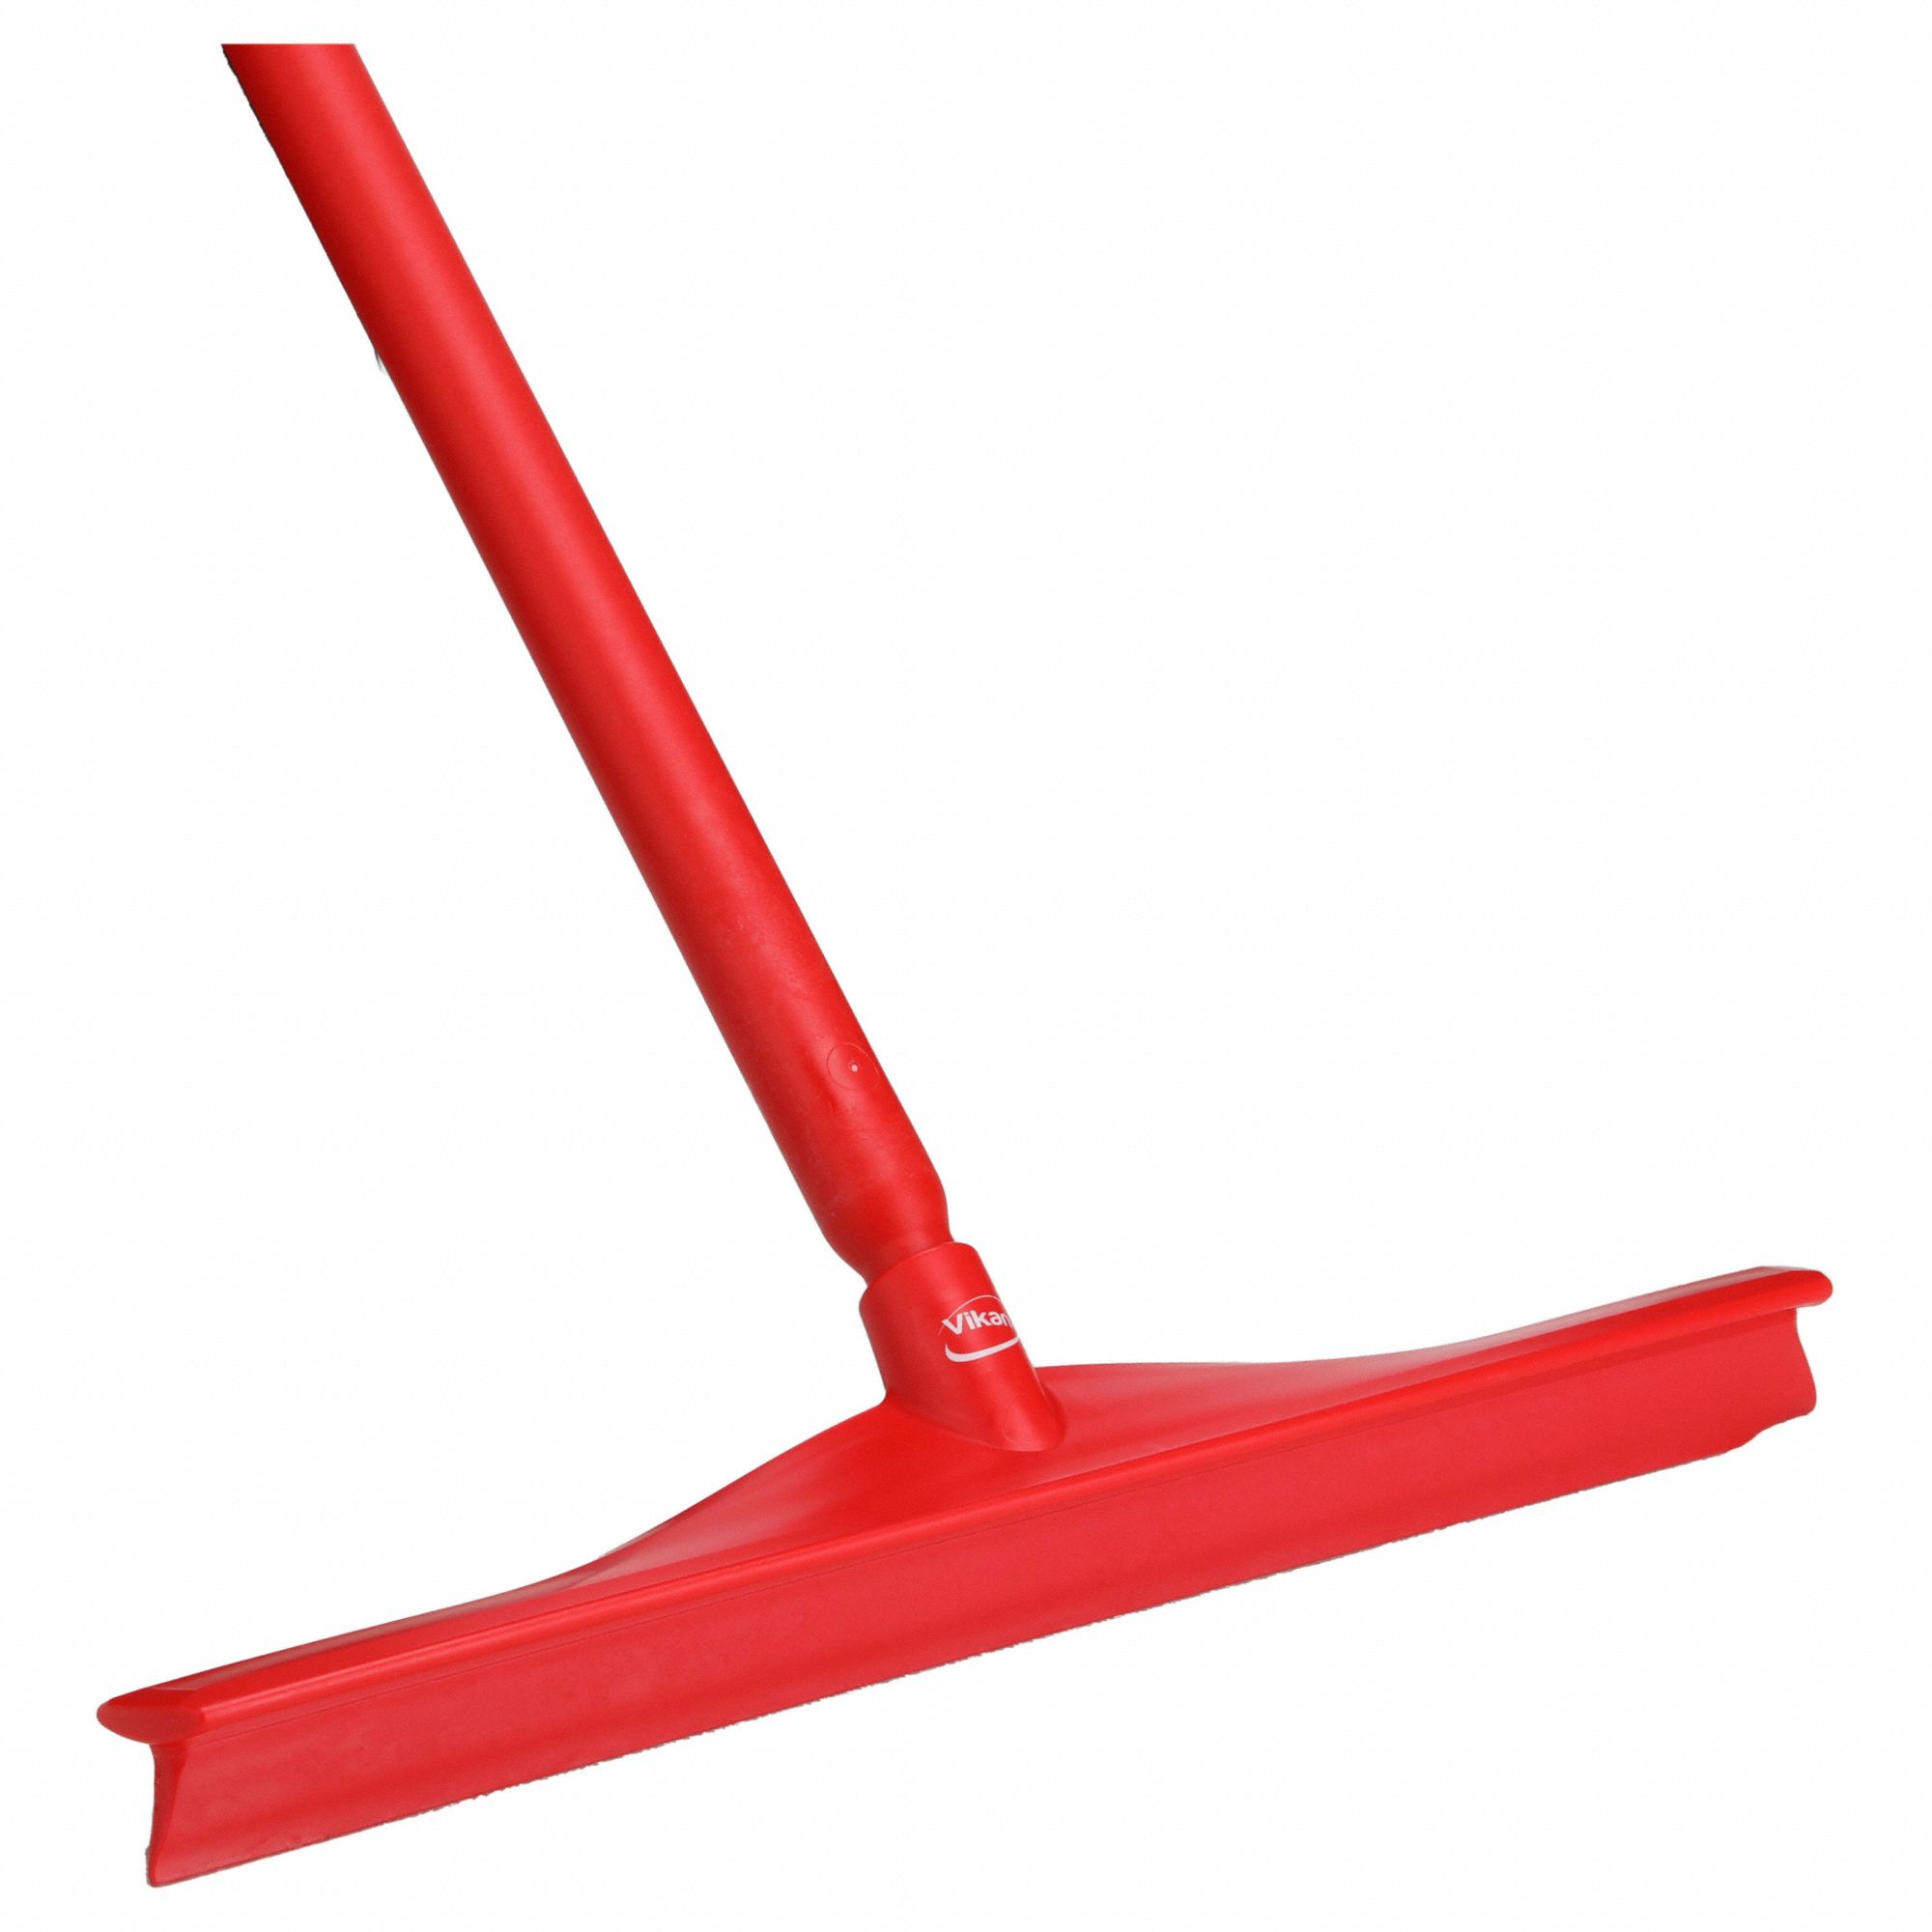 Plastic Squeegees in stock for same day shipment